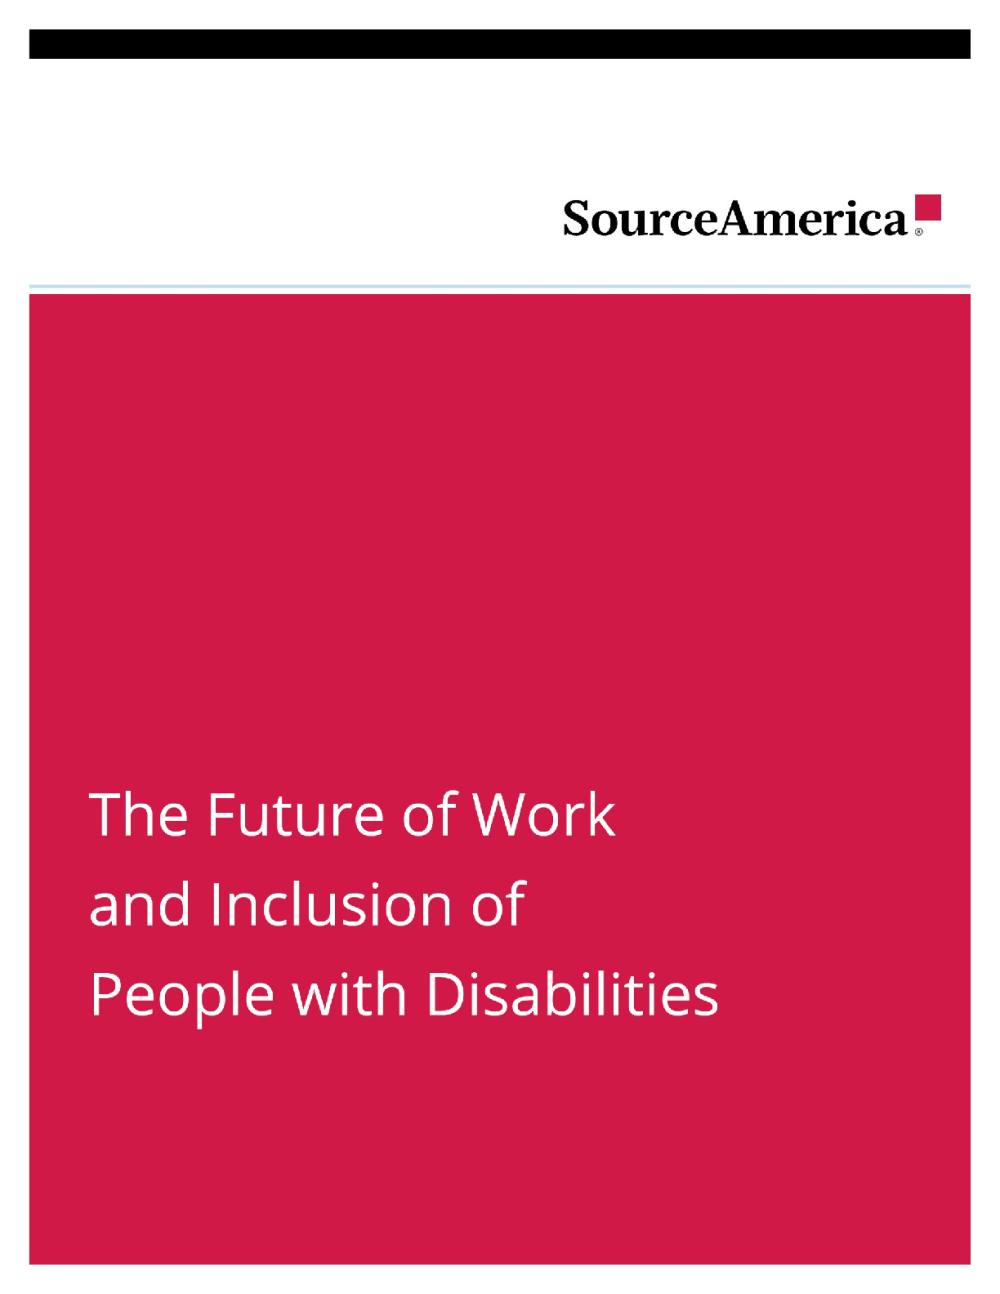 The Future of Work and Inclusion of People with Disabilities